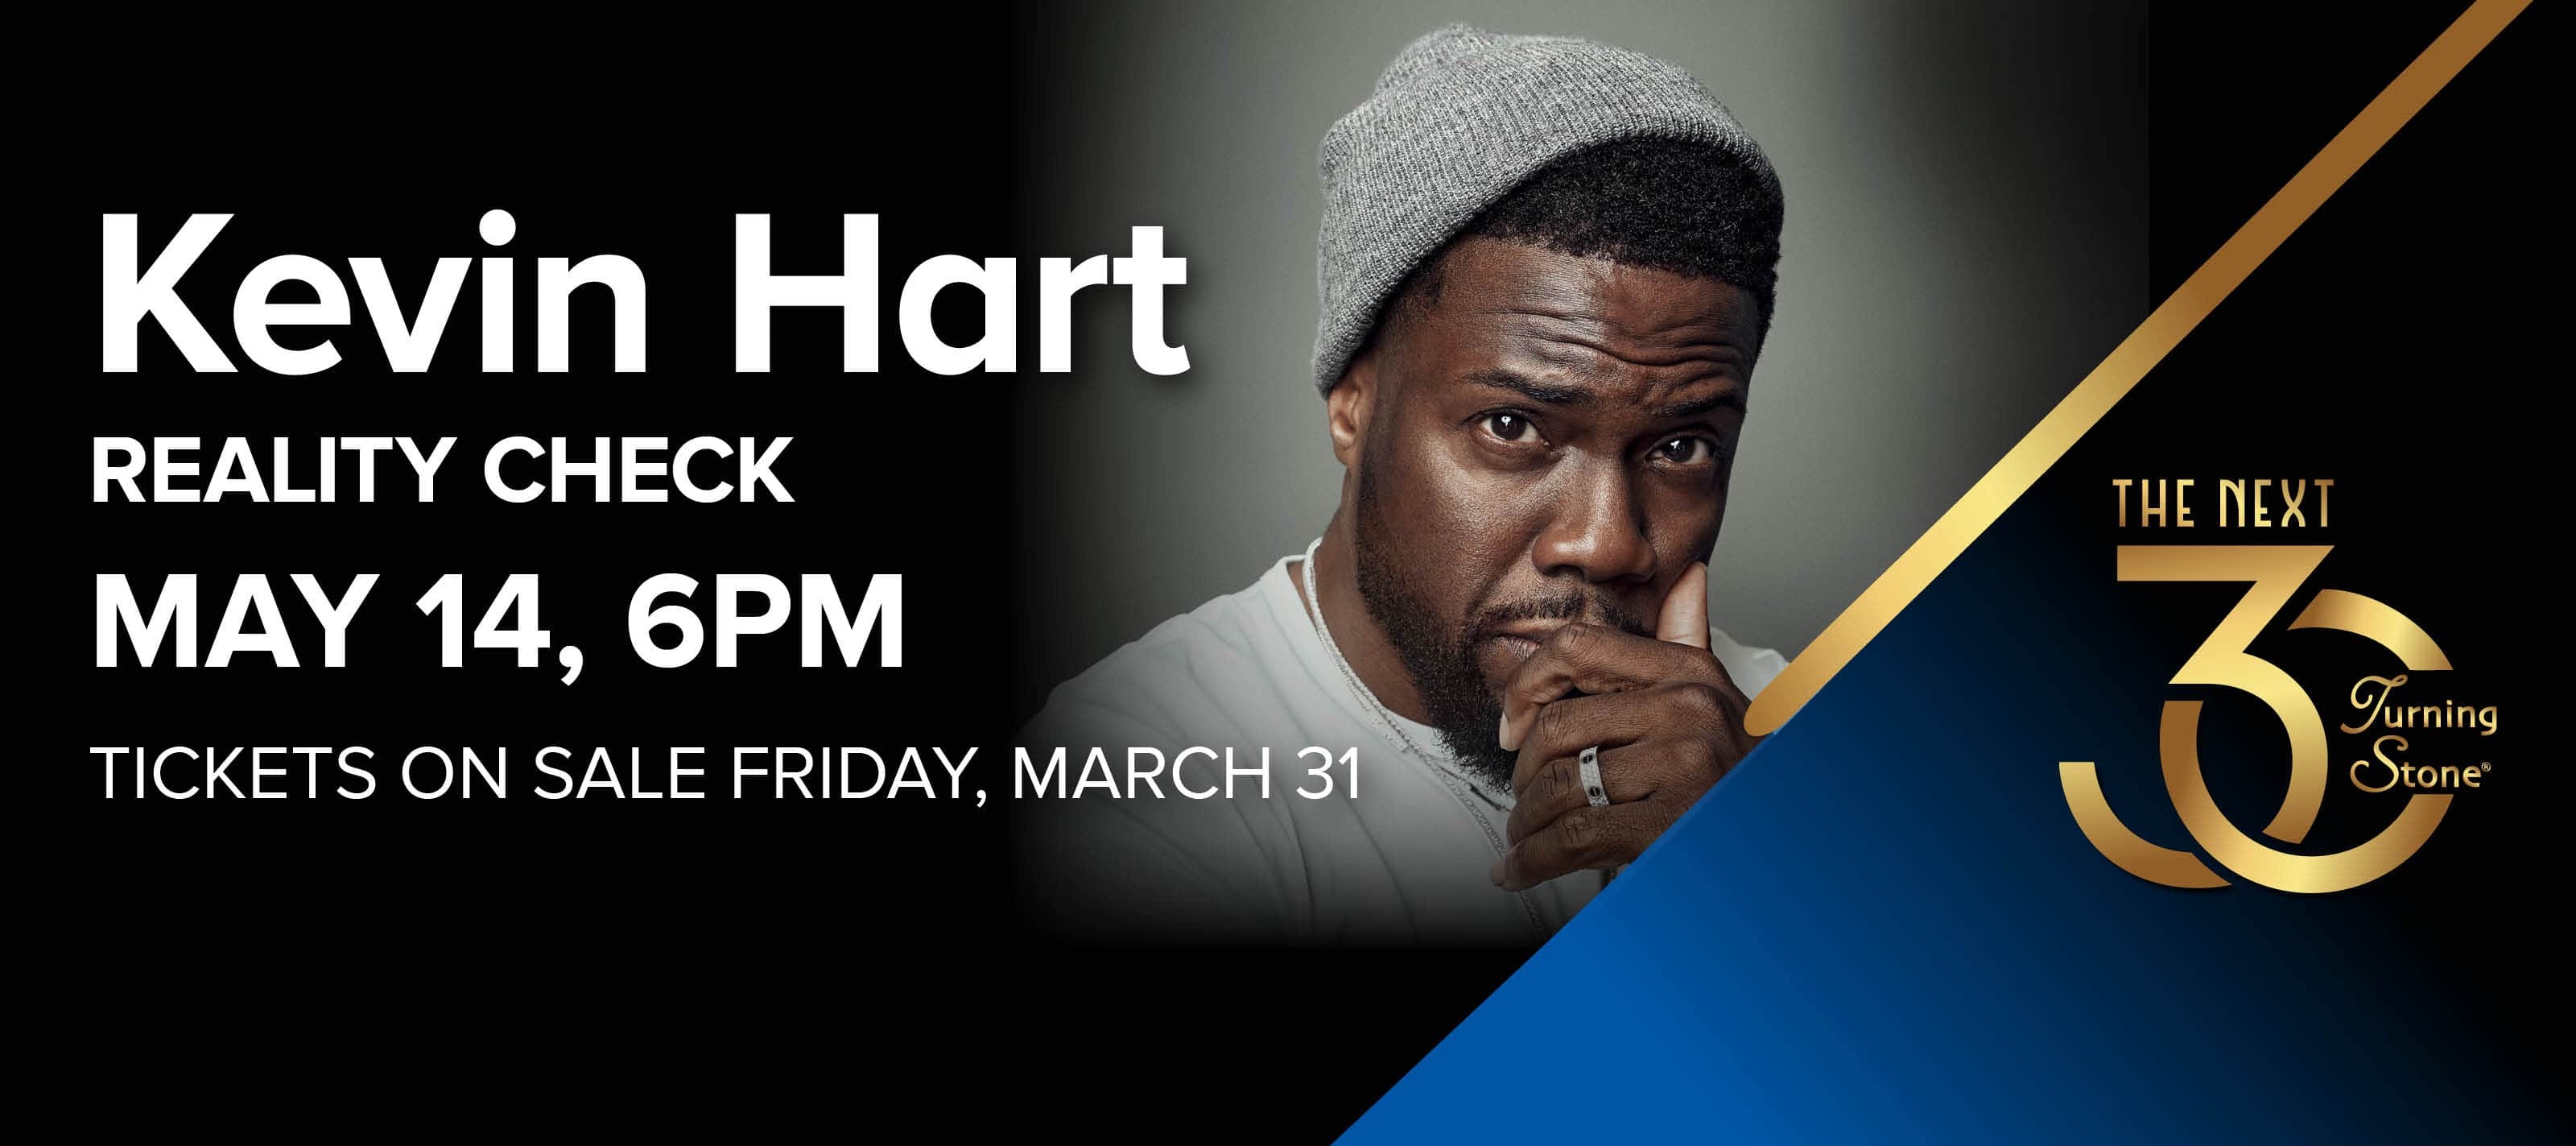 Kevin Hart Reality Check May 14 6pm Tickets On Sale Friday March 31